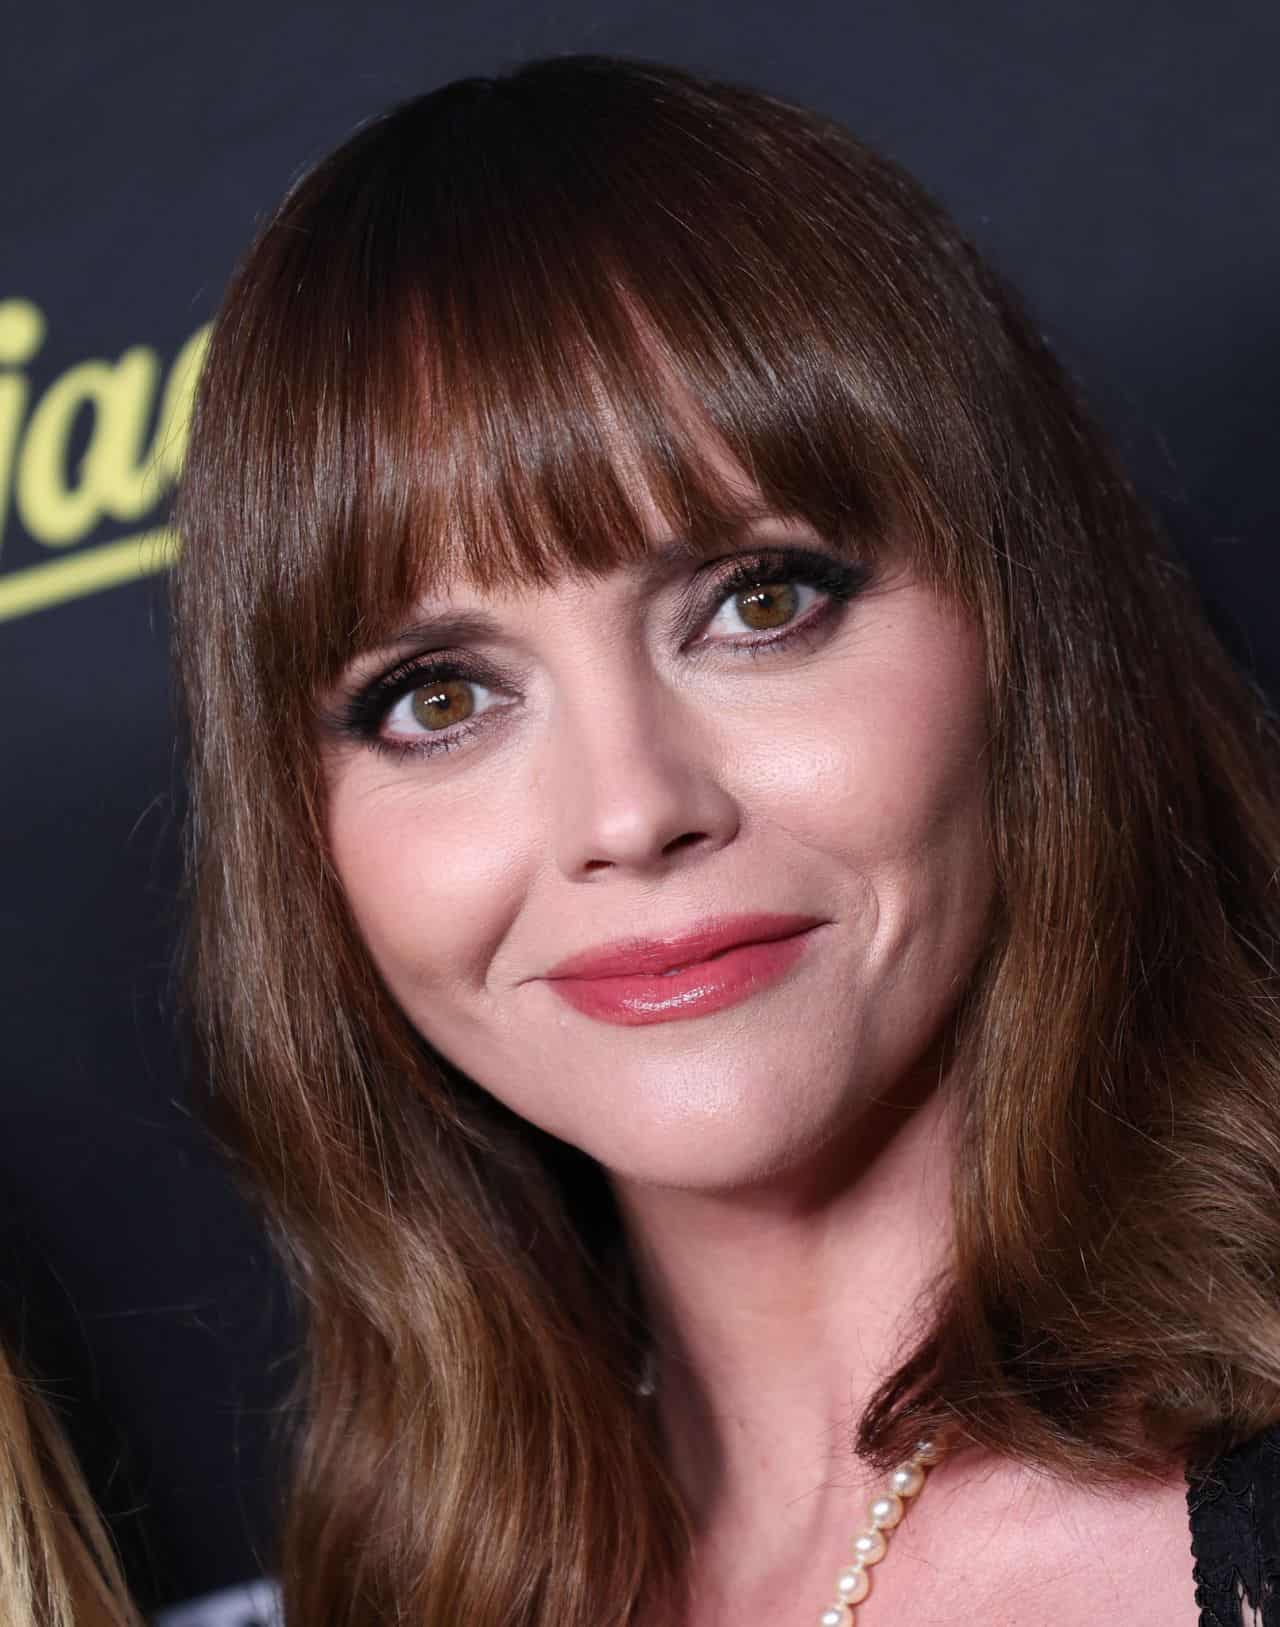 Christina Ricci Wore a Daring Lace Dress at the "Yellowjackets" FYC Event